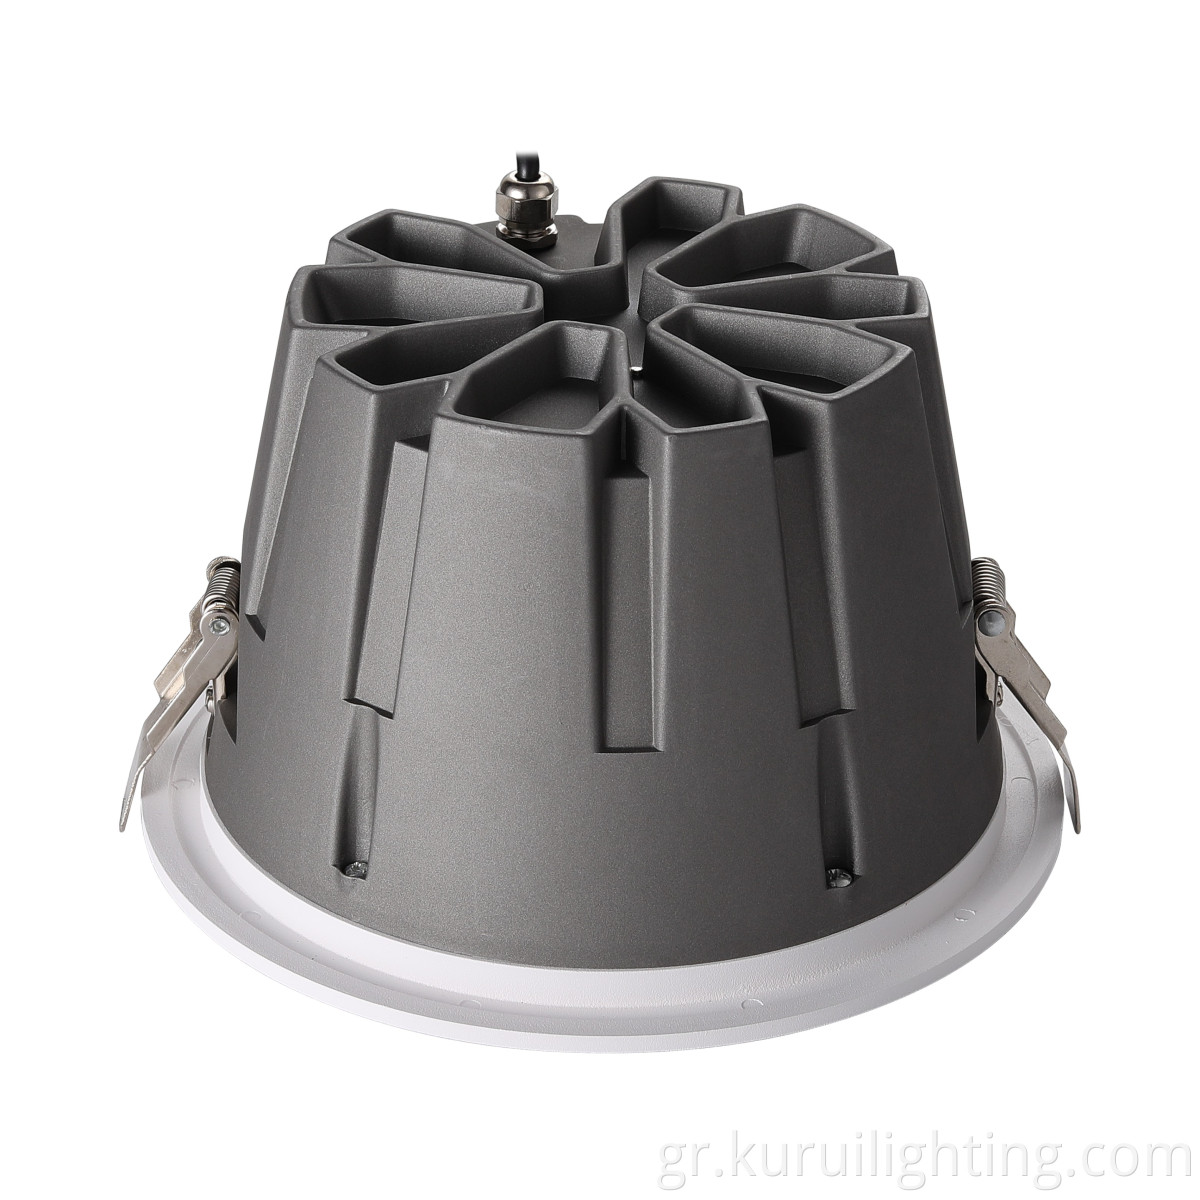 Commercial Led Recessed Downlights